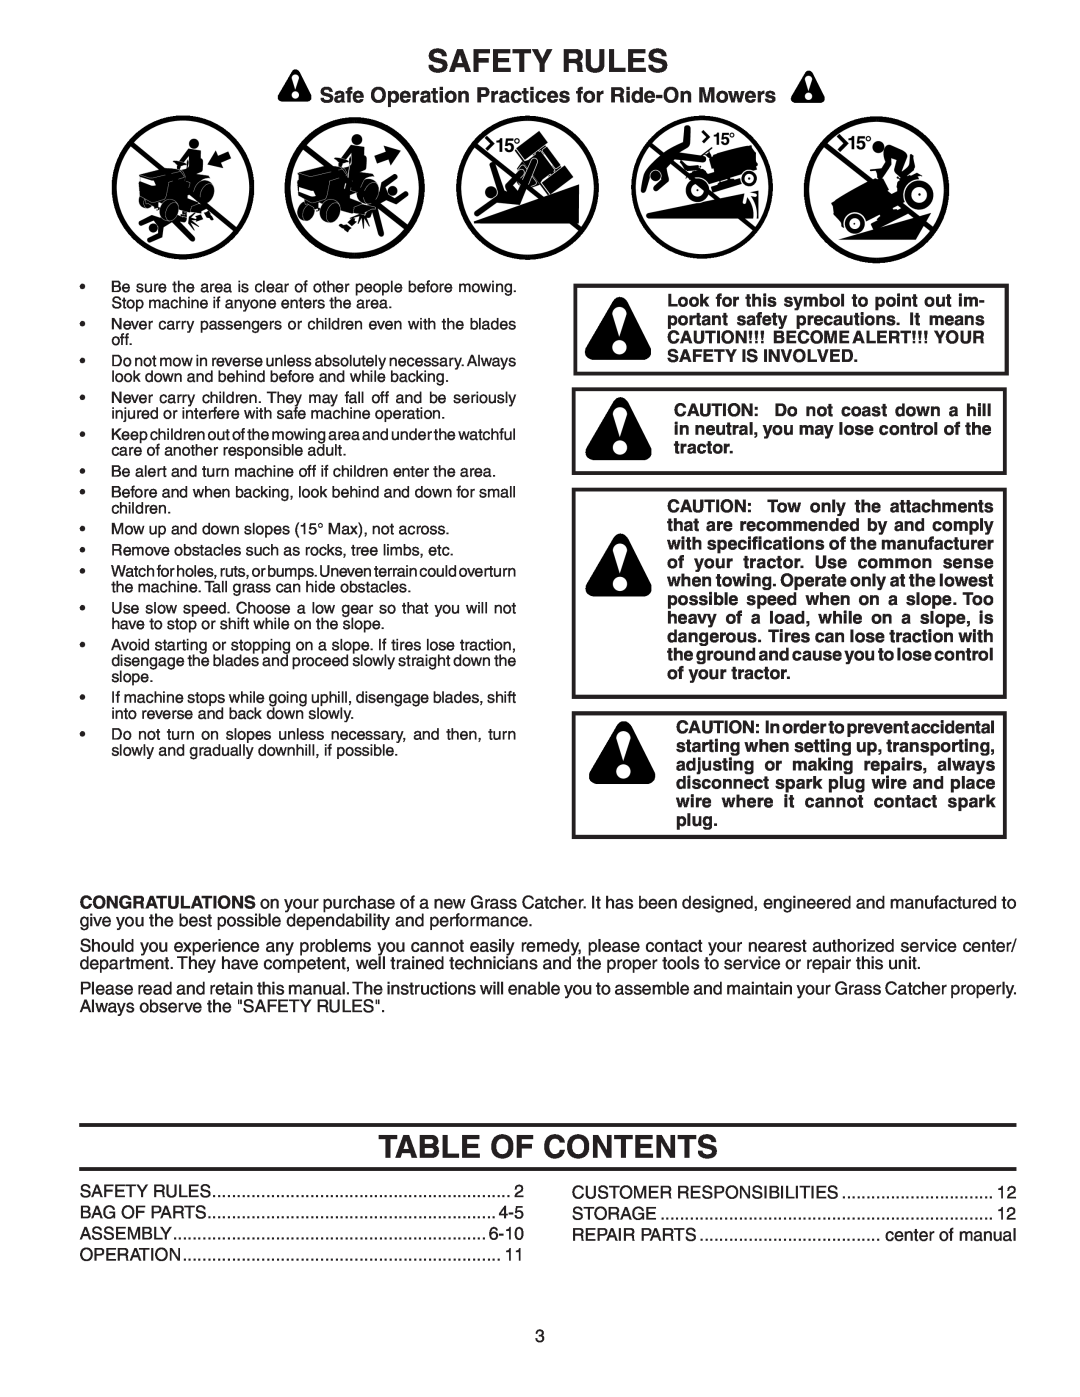 Poulan CG46A, 964 04 06-07, 151673 owner manual Table Of Contents, Safety Rules 